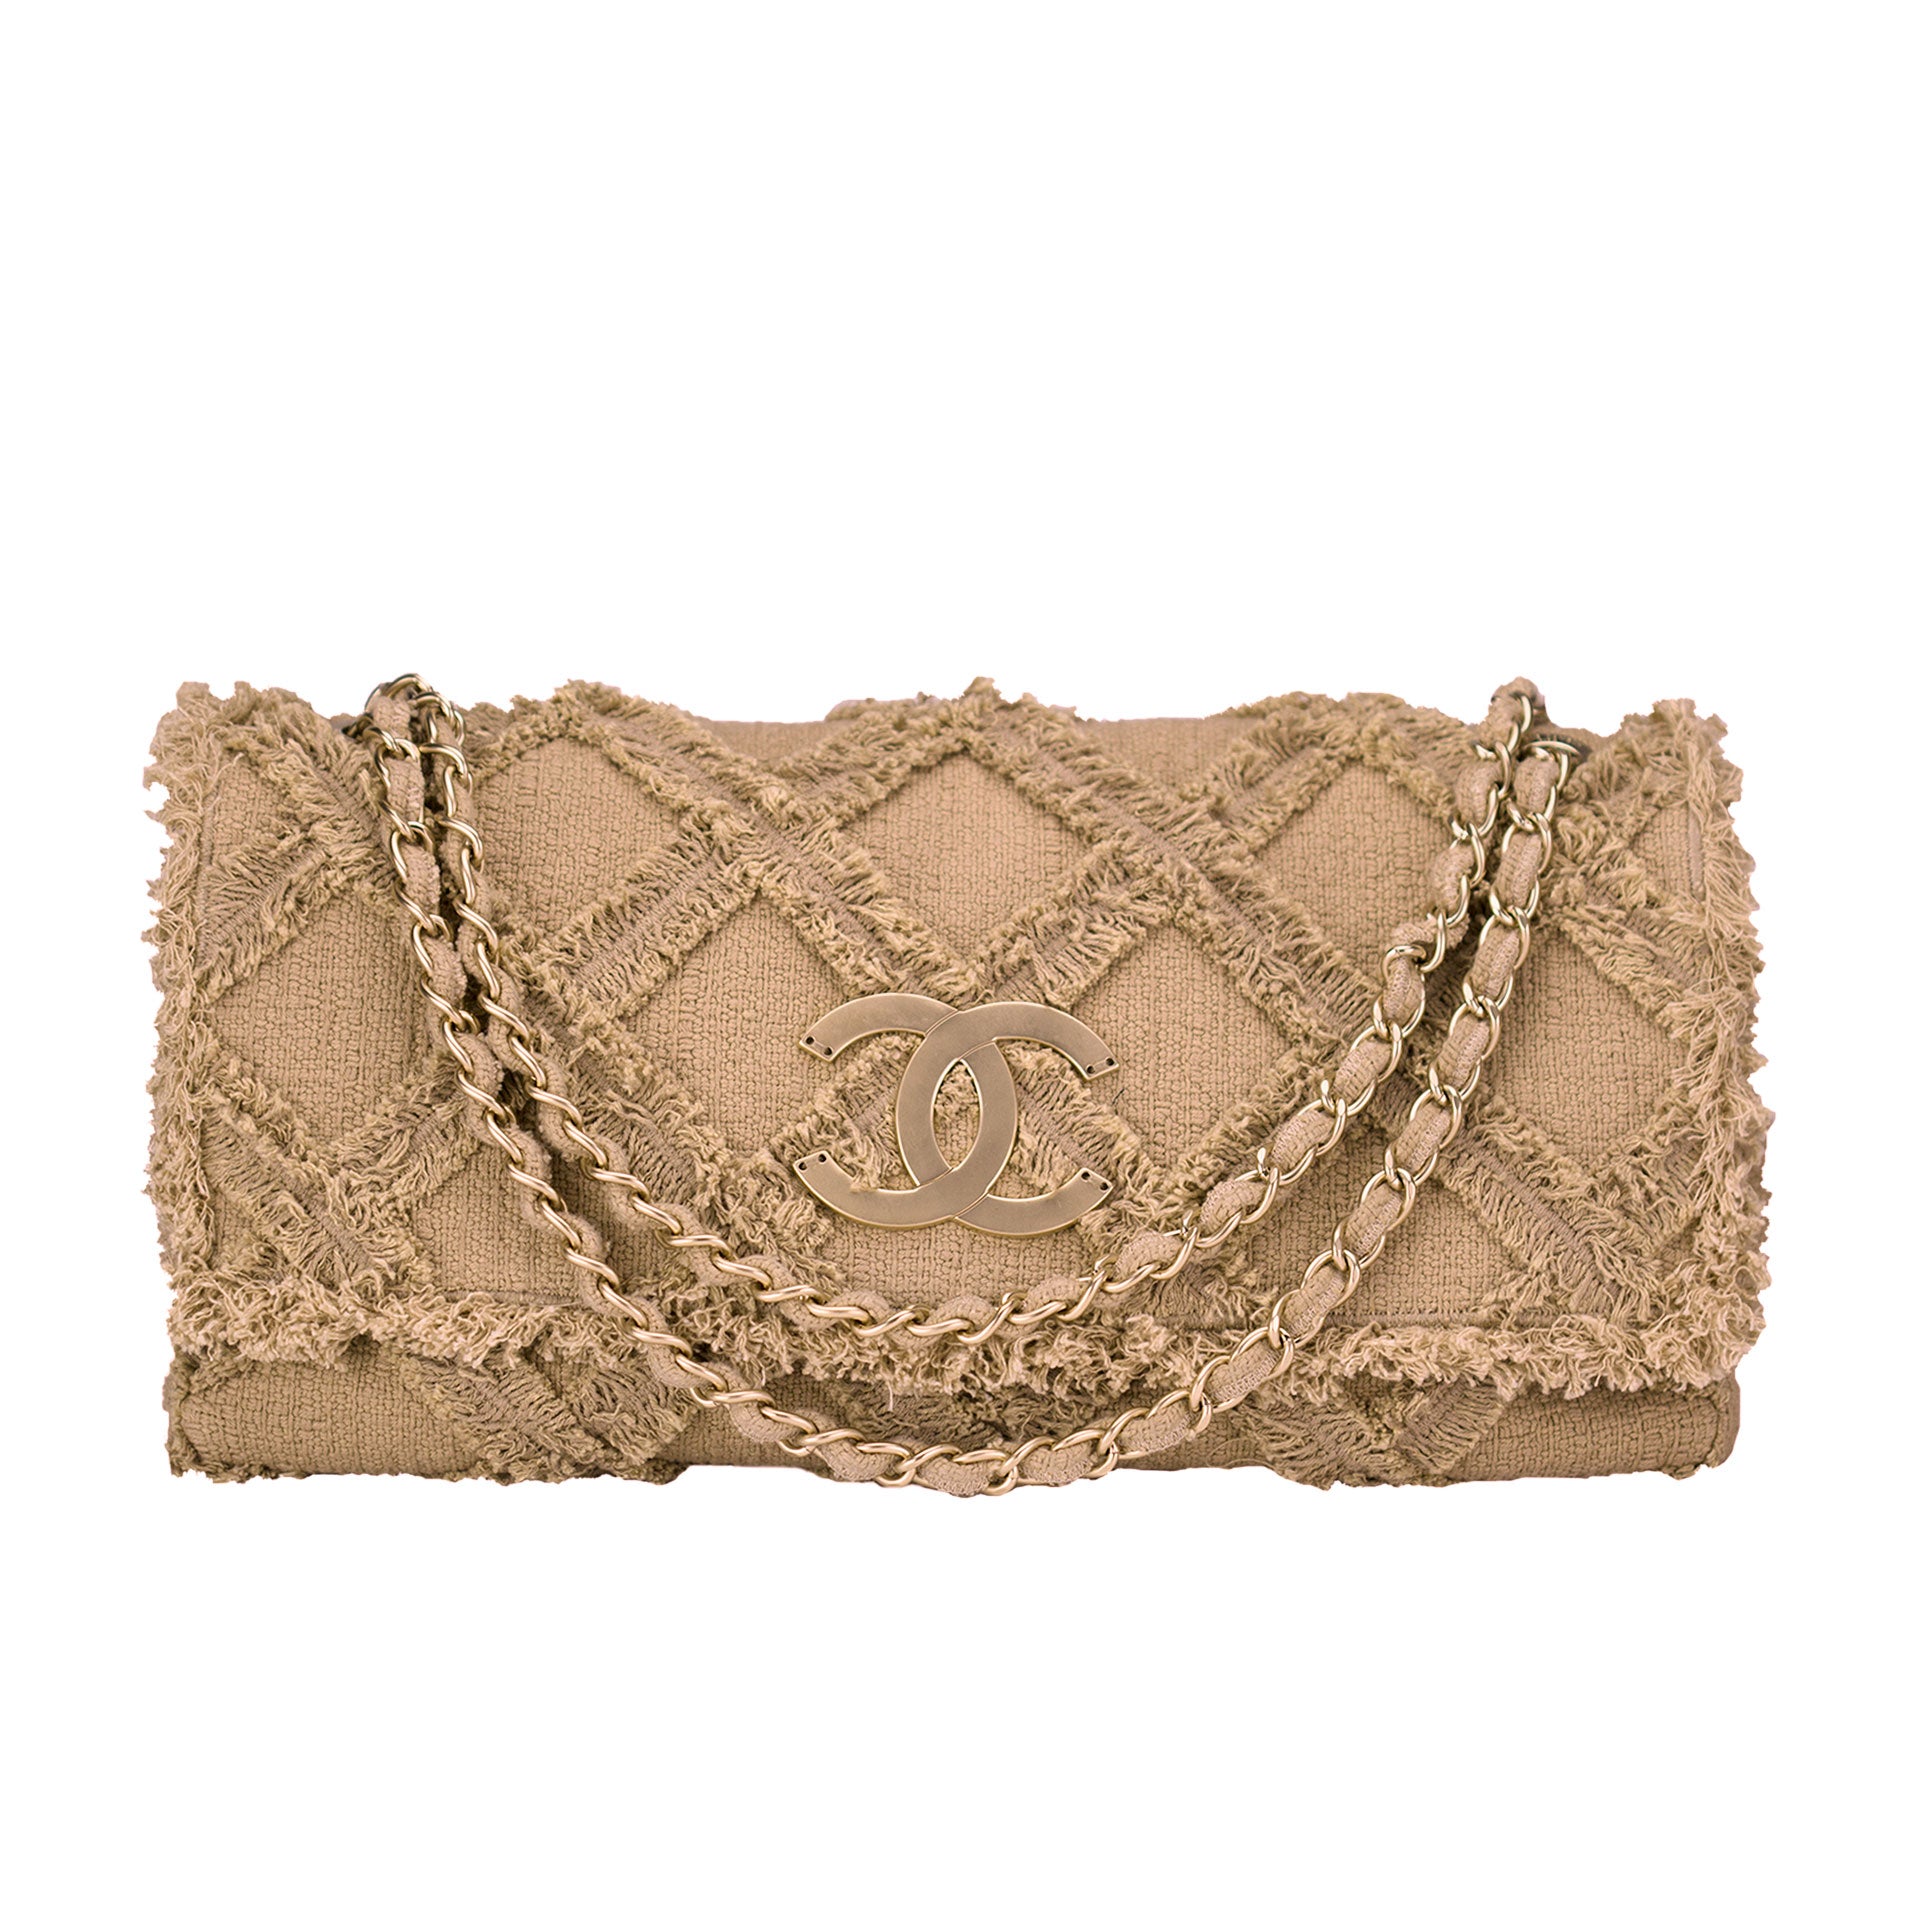 CHANEL Pre-Owned Crochet Cayo Coco Classic Flap Shoulder Bag